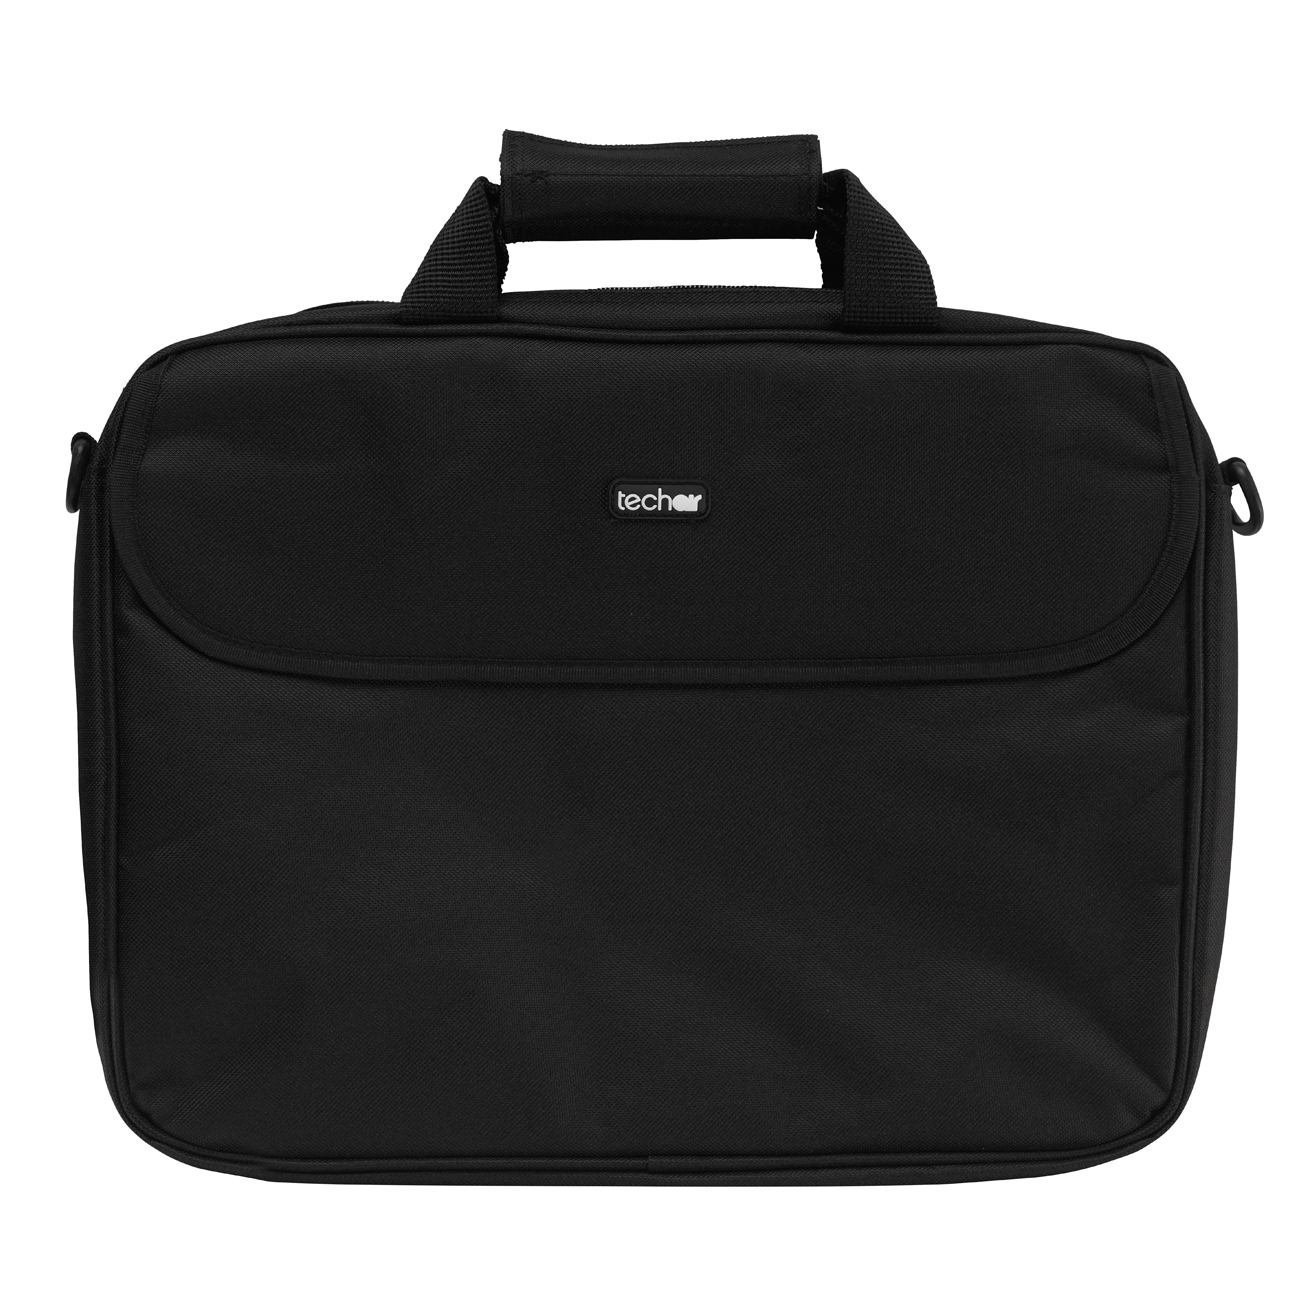 Tech Air Classic Basic Notebook Case 29.5 CM [11.6] Briefcase Black (Z0141 11.6 Inch Entry Level Branded Case)